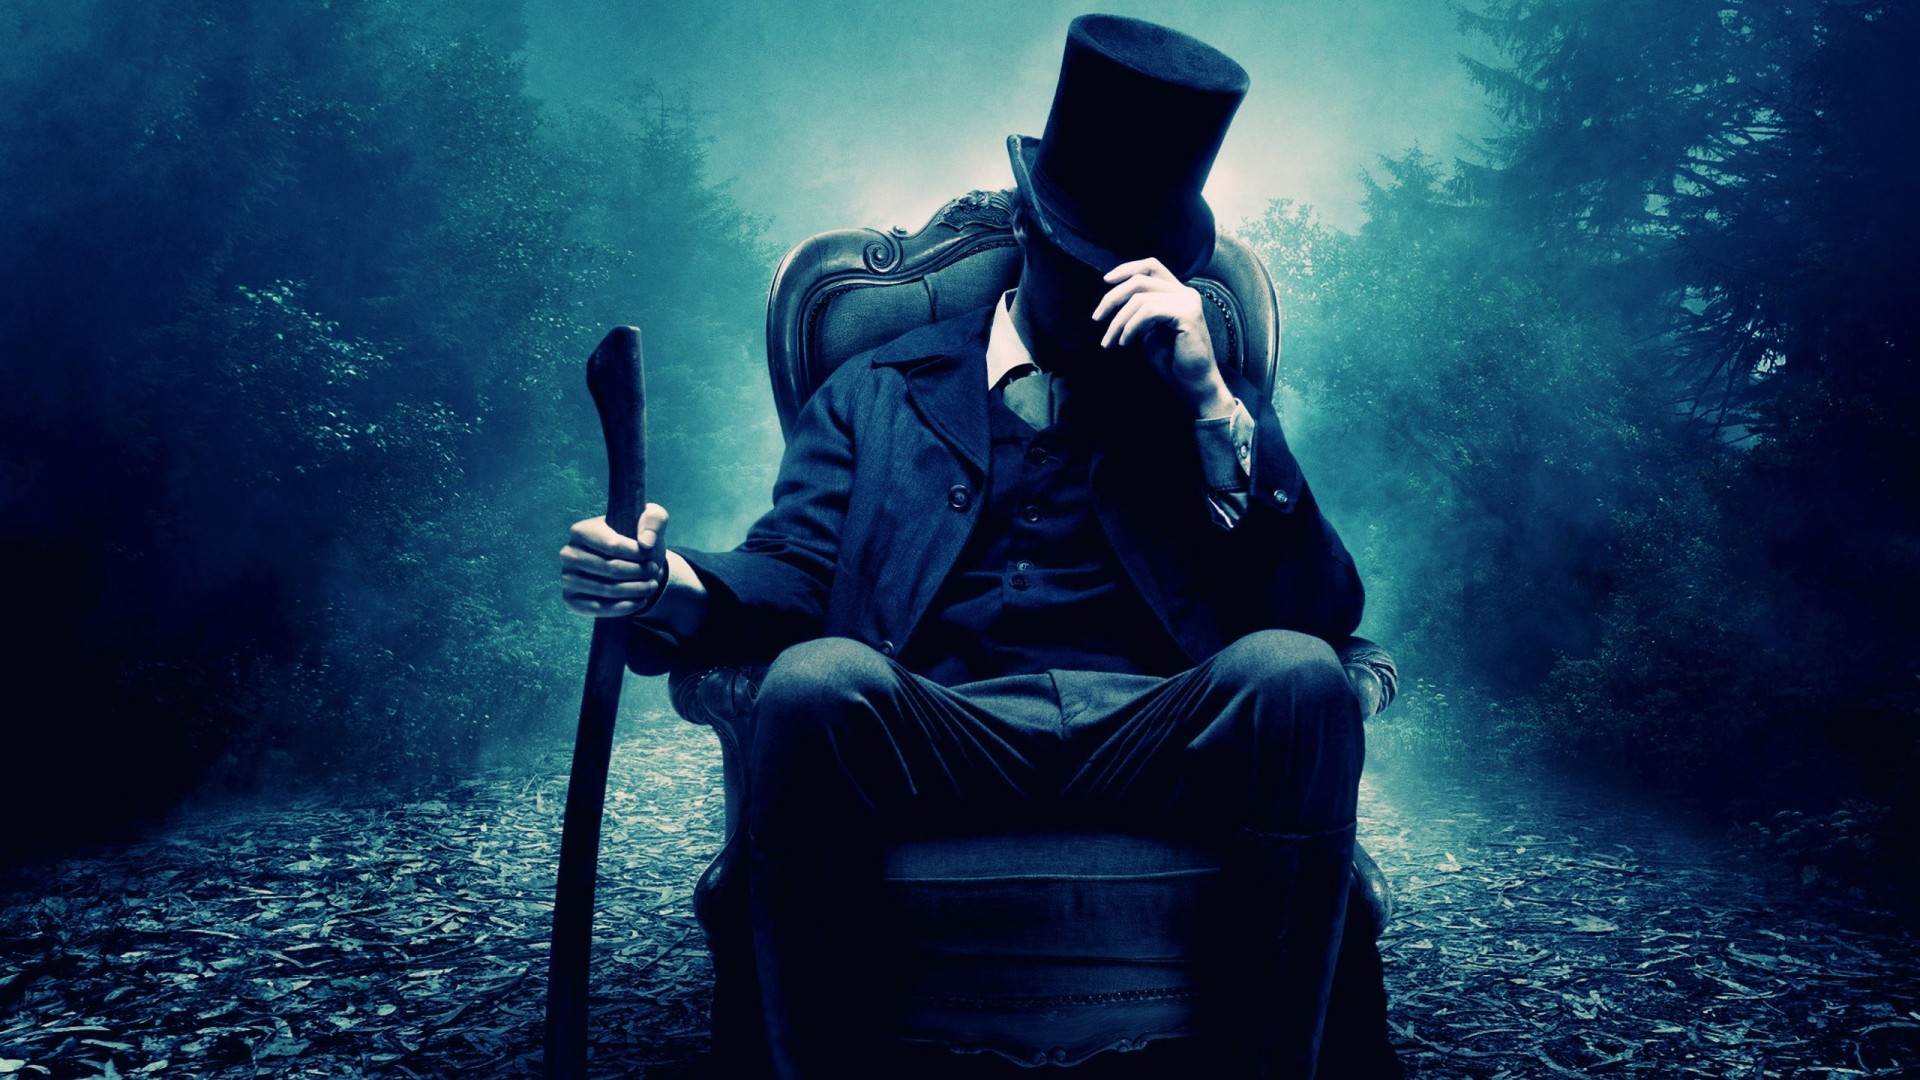 1920x1080 43 Magician HD Wallpapers/Backgrounds For Free Download, BsnSCB .